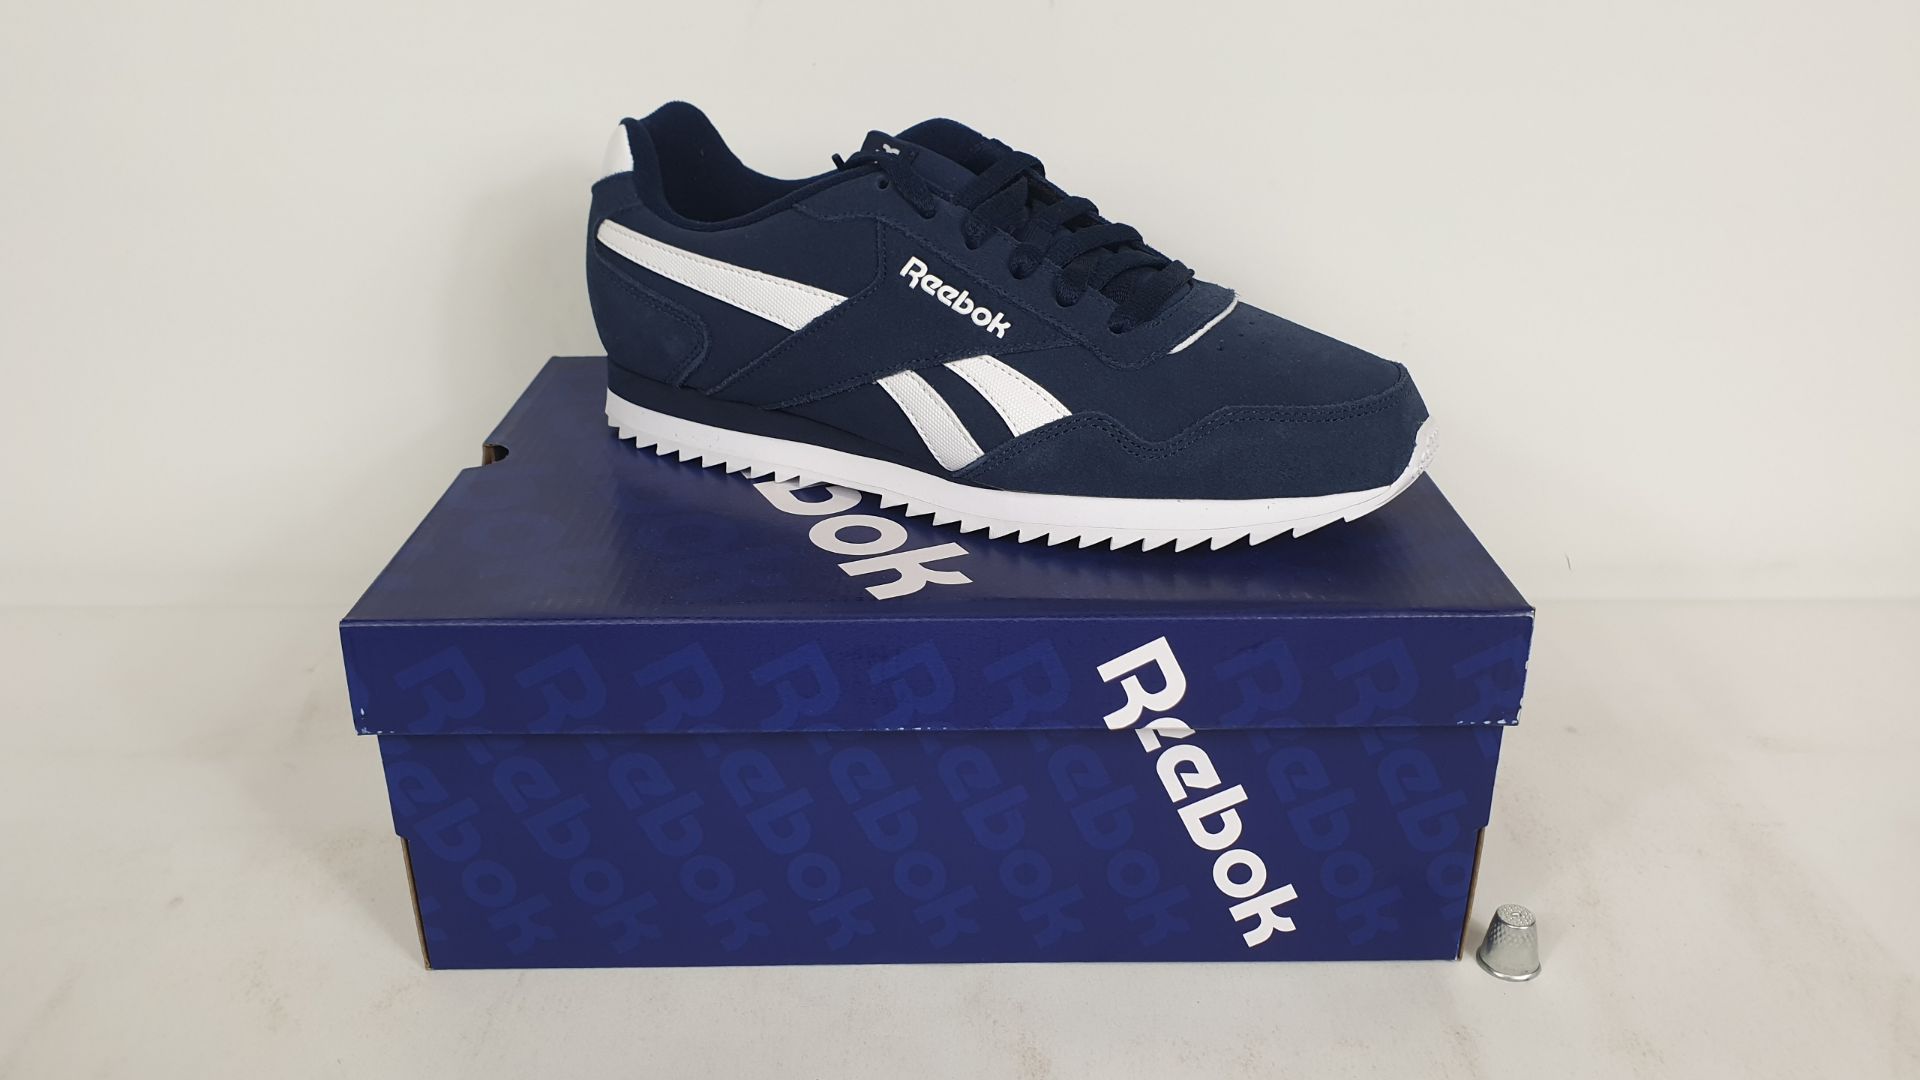 6 X PAIRS OF REEBOK TRAINERS ROYAL GLIDE COLLEGIATE NAVY / WHITE SIZE 9.5 - BRAND NEW AND BOXED